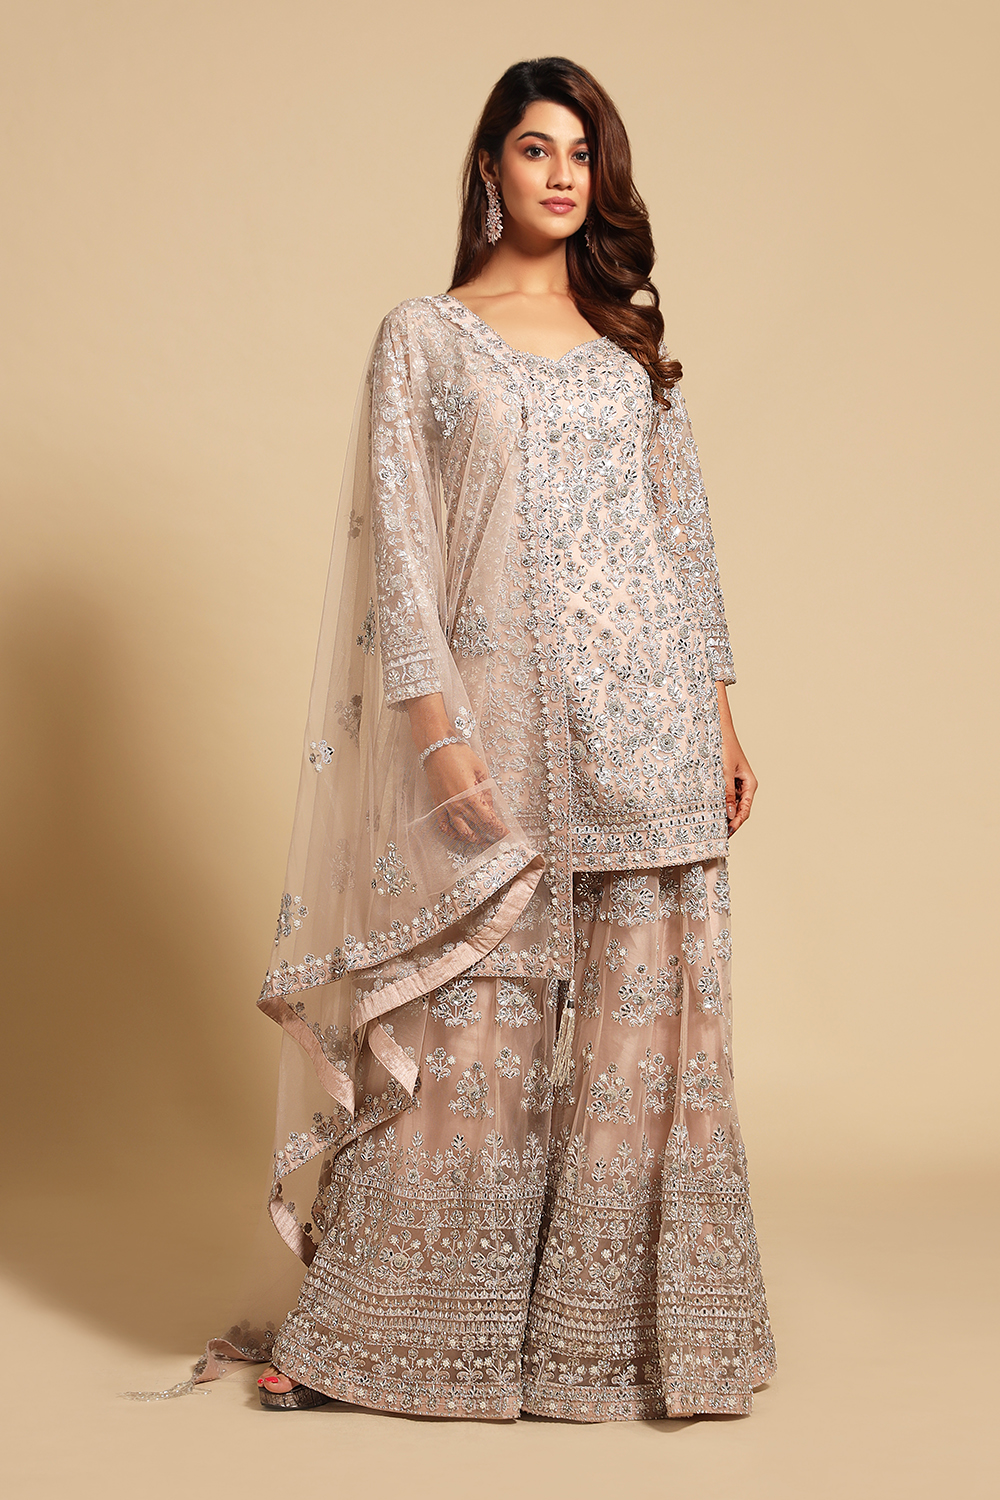 Party Wear Palazzo Suits Online India to Elevate Your Style